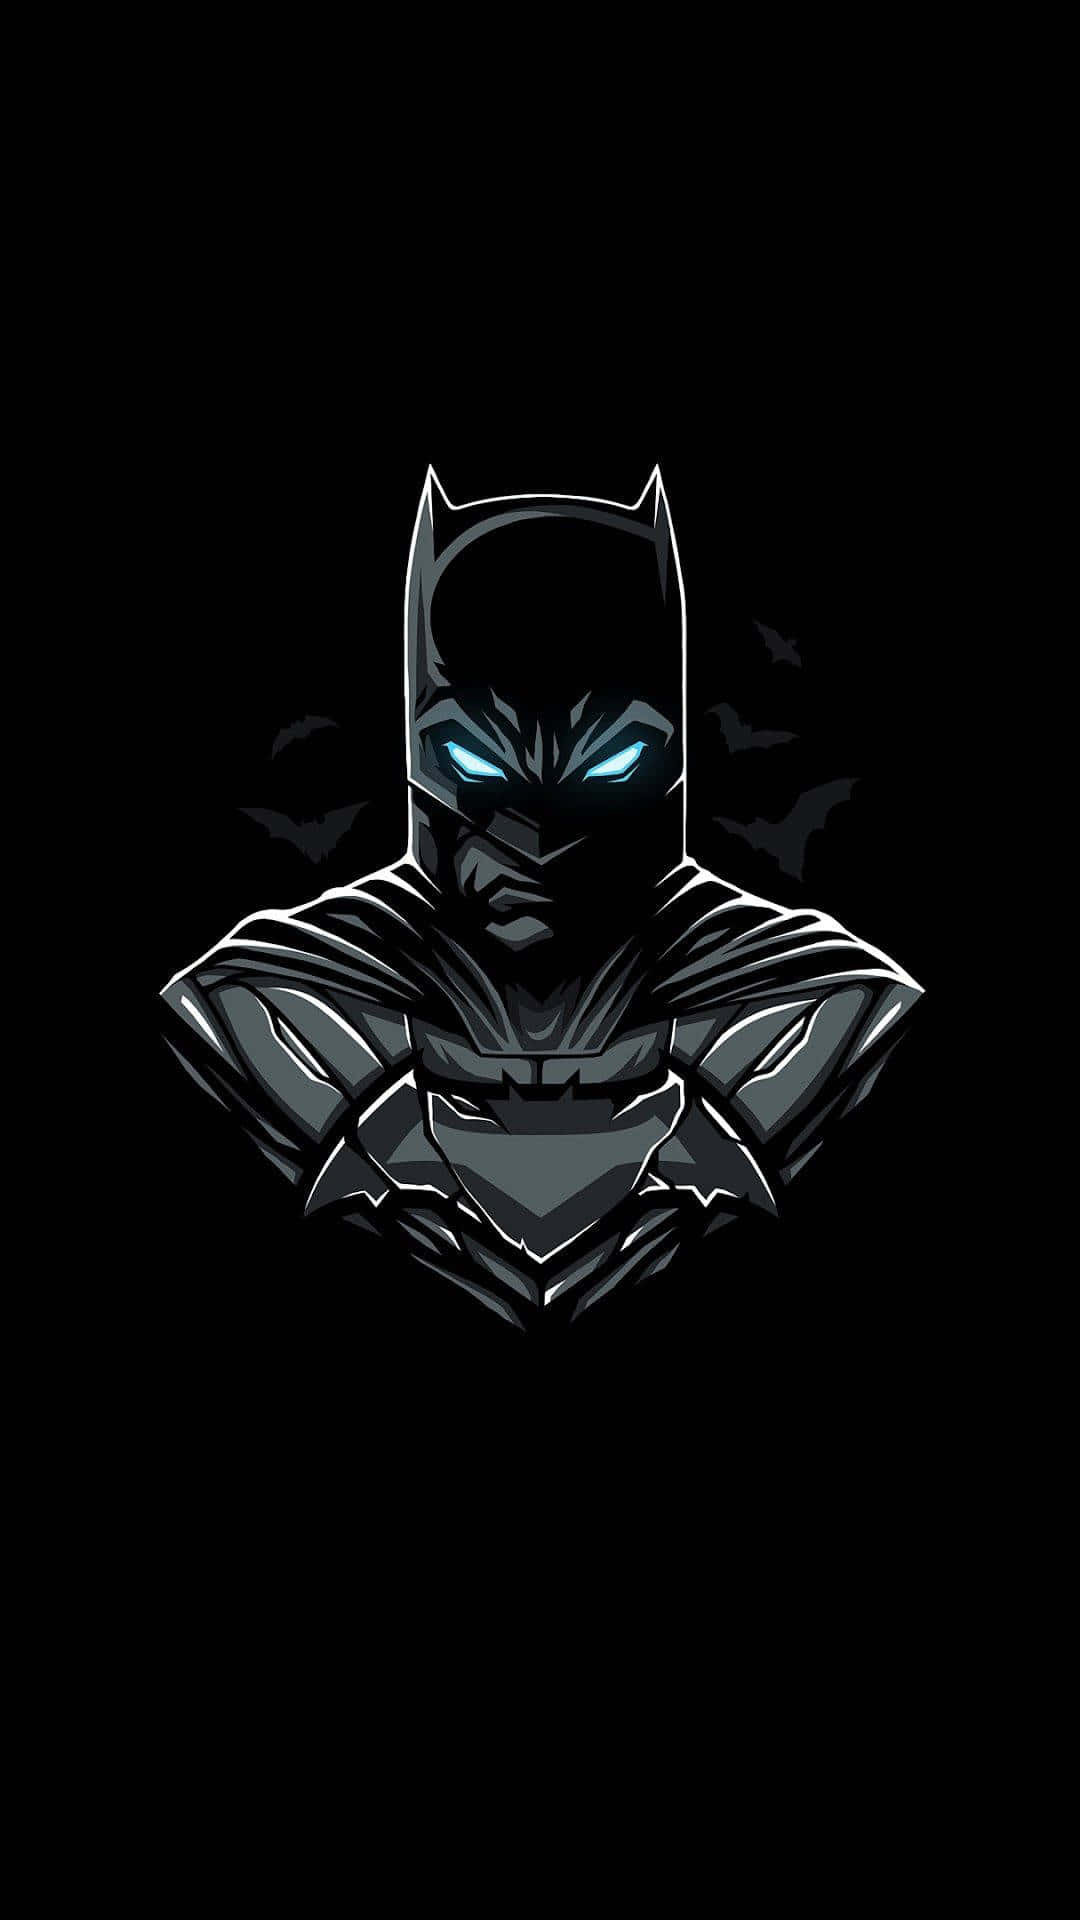 Rock the Batman logo wherever you go with this cool Awesome Batman Iphone. Wallpaper